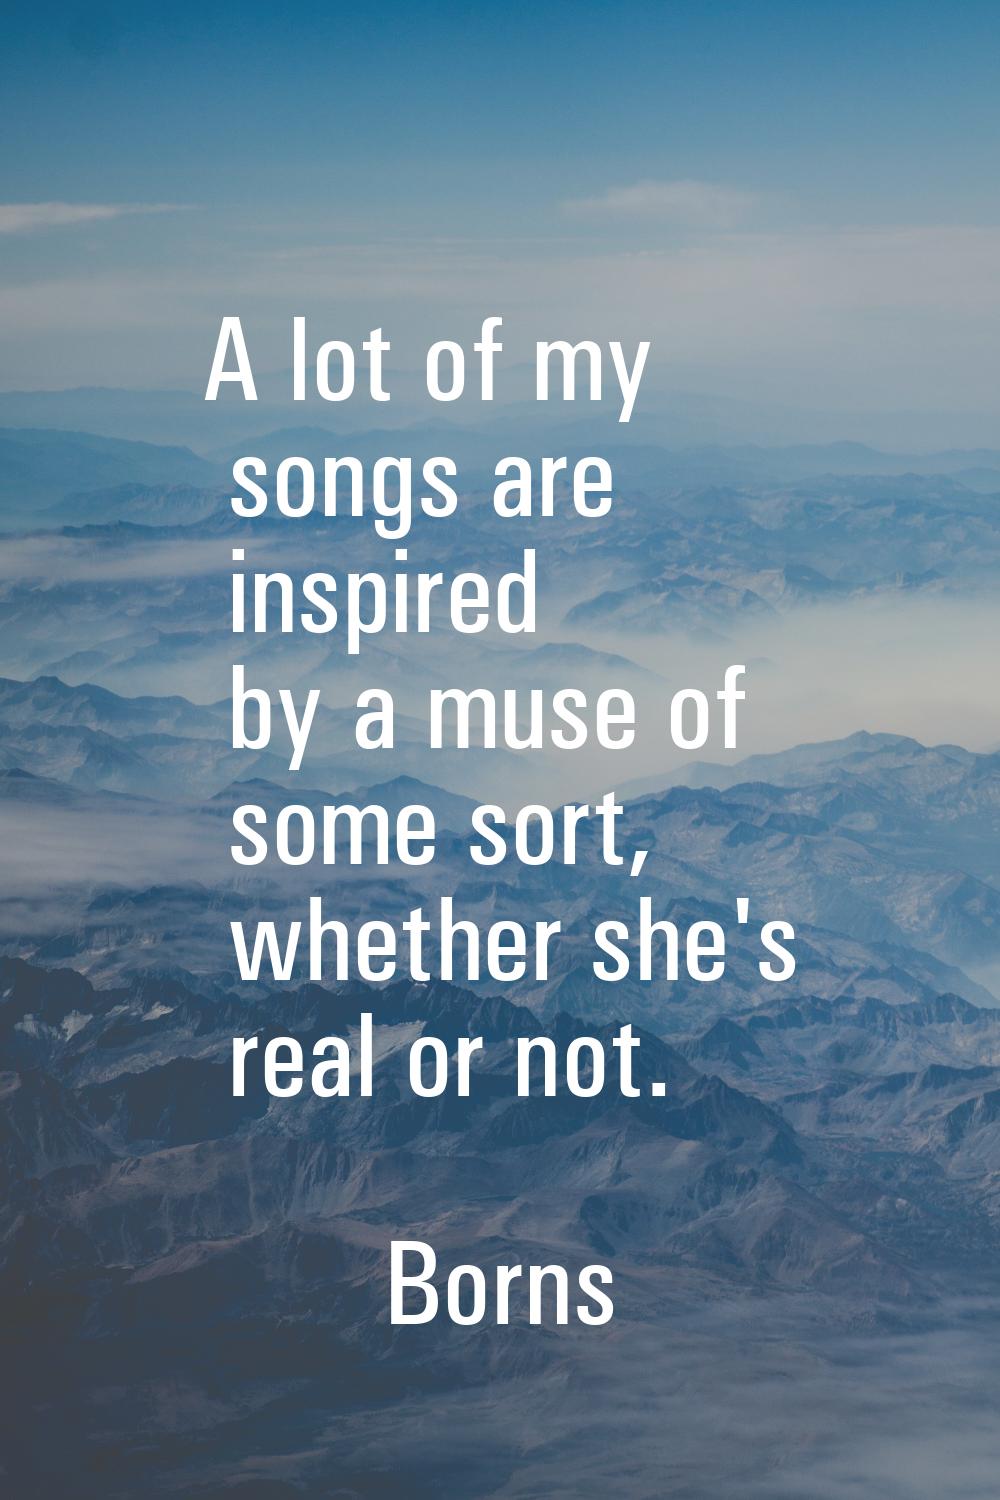 A lot of my songs are inspired by a muse of some sort, whether she's real or not.